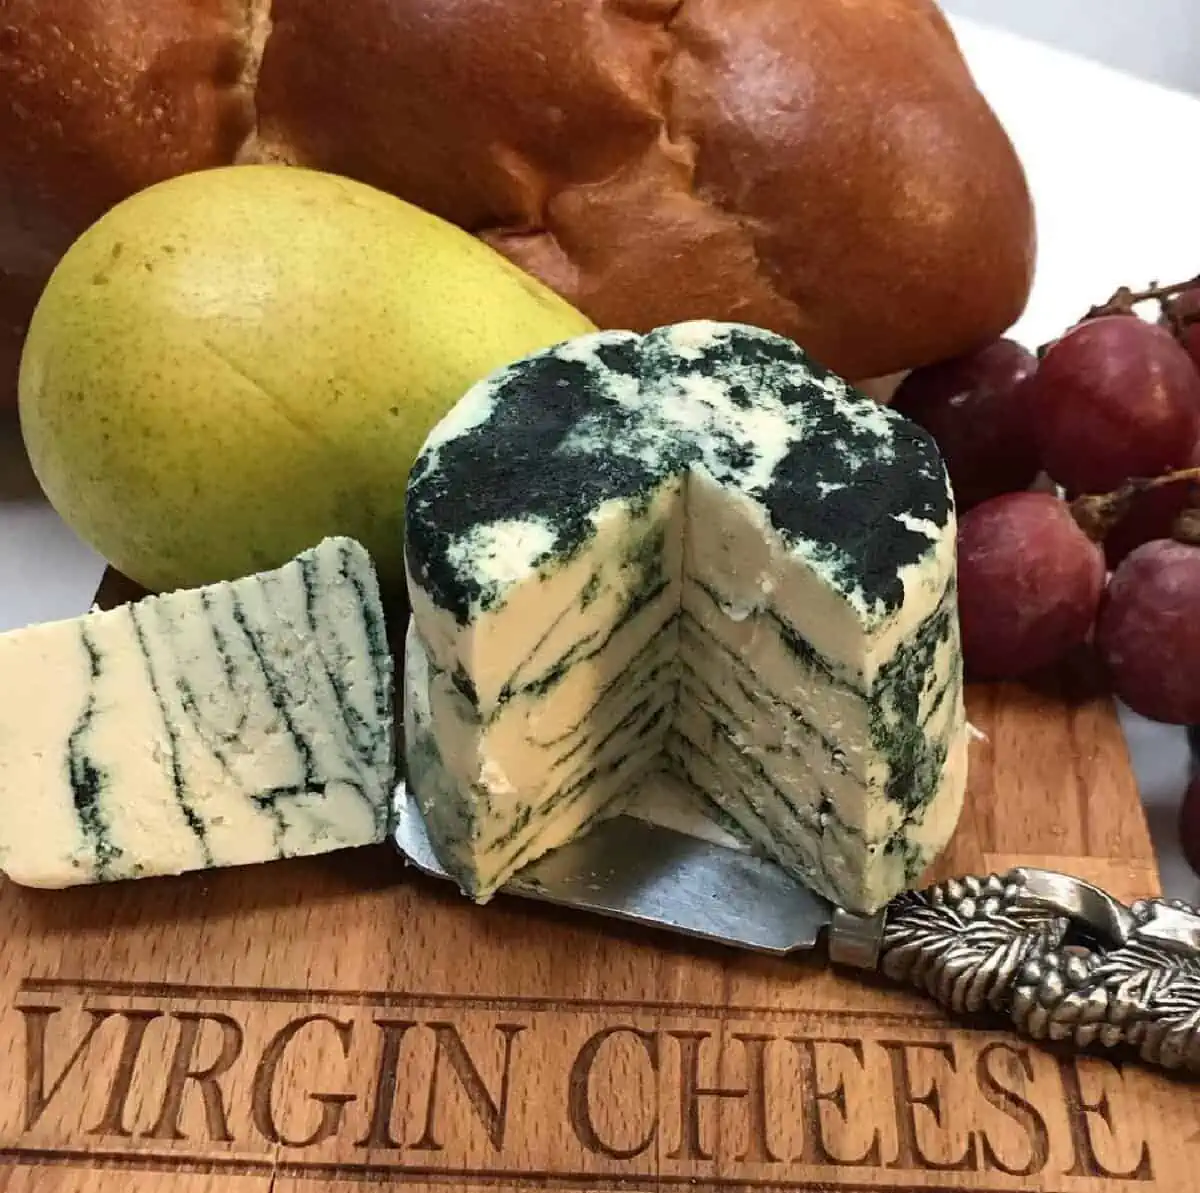 A cutting board with Virgin Cheese etched into the surface holding a cut wedge of vegan blue chese, loaves of bread, grapes, and a pear along with a decorative cheese knife.